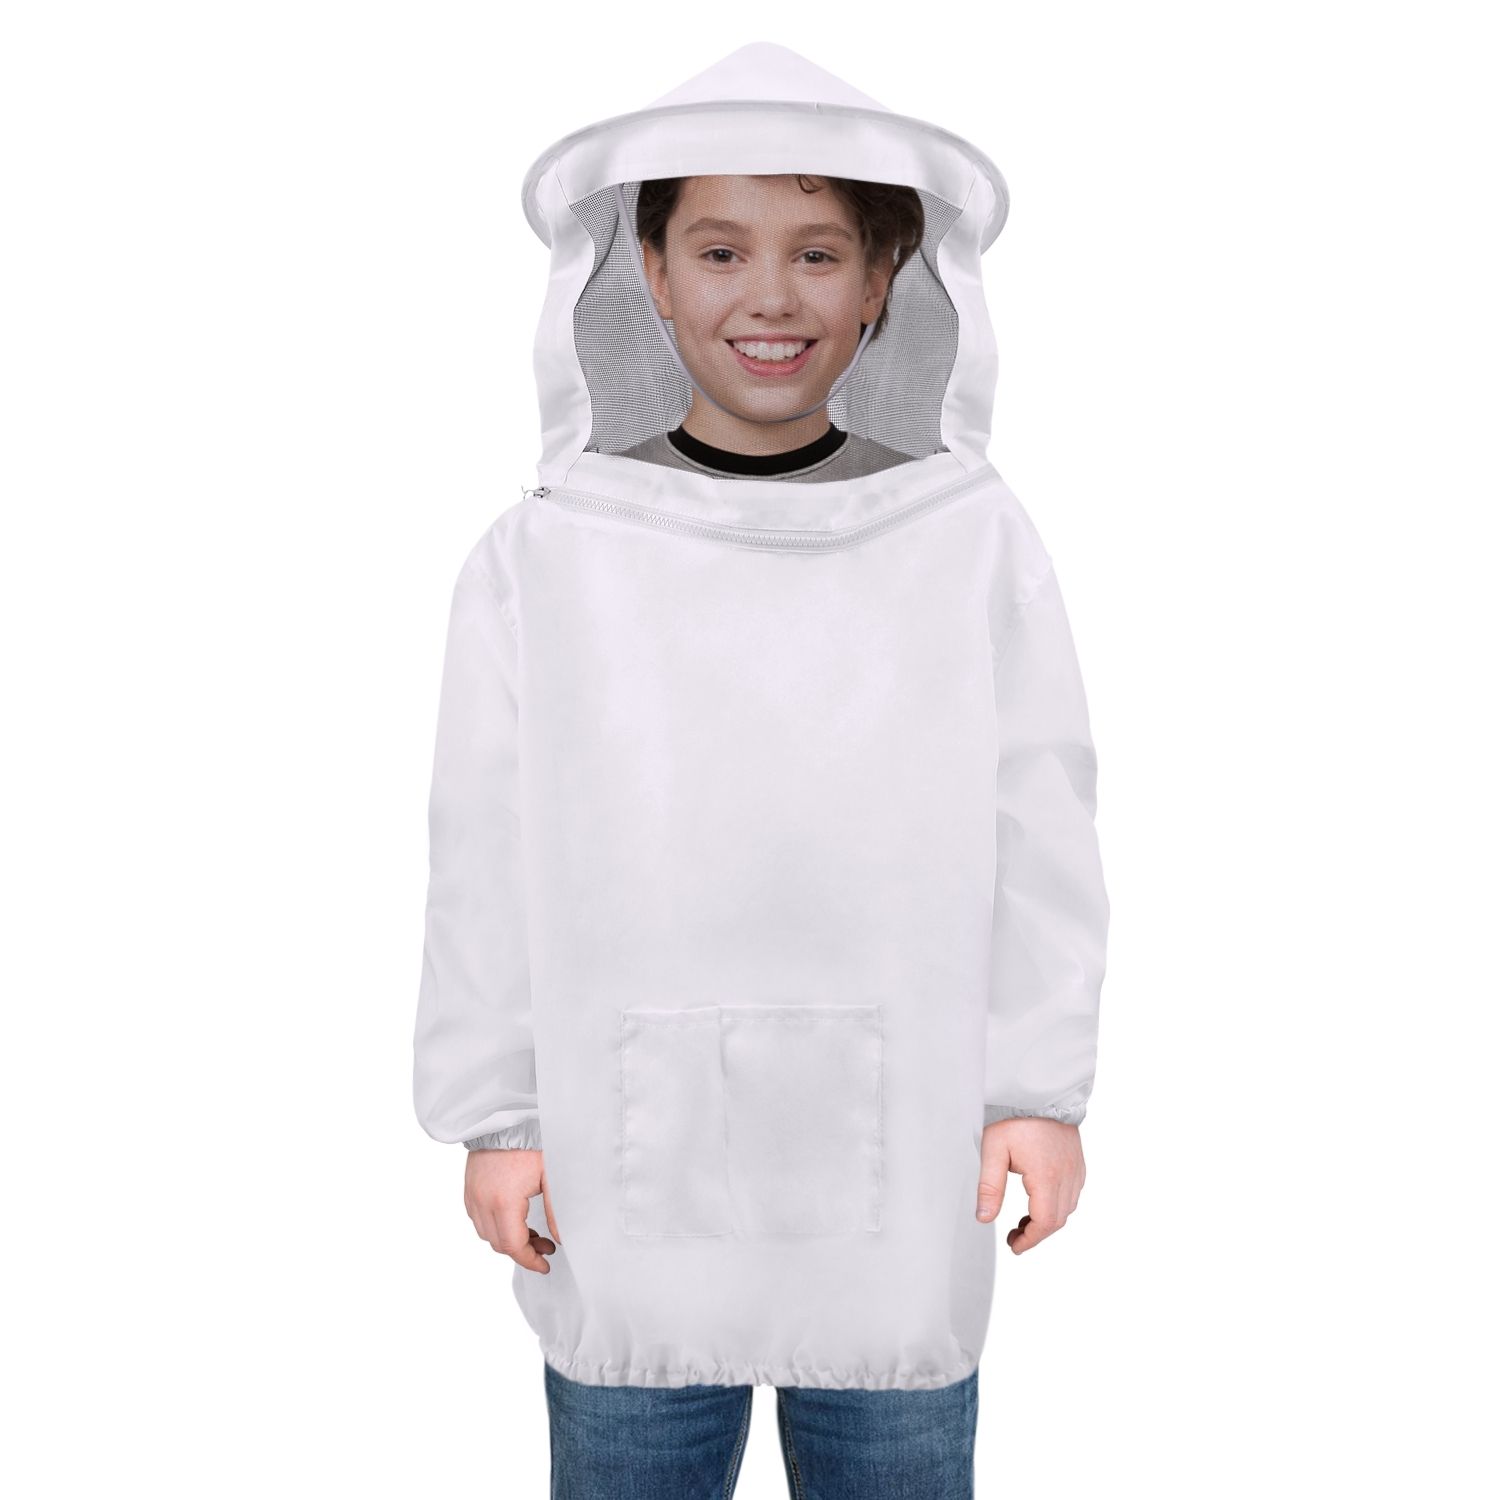 Ce Compass Bee Jact Kid M Beekeeping Jacket Premium Beekeeper Pull Over Suit Coat Outfit With Protective Veil Smock Hood For Bee Hive Kids M White,When Are Figs In Season In Florida